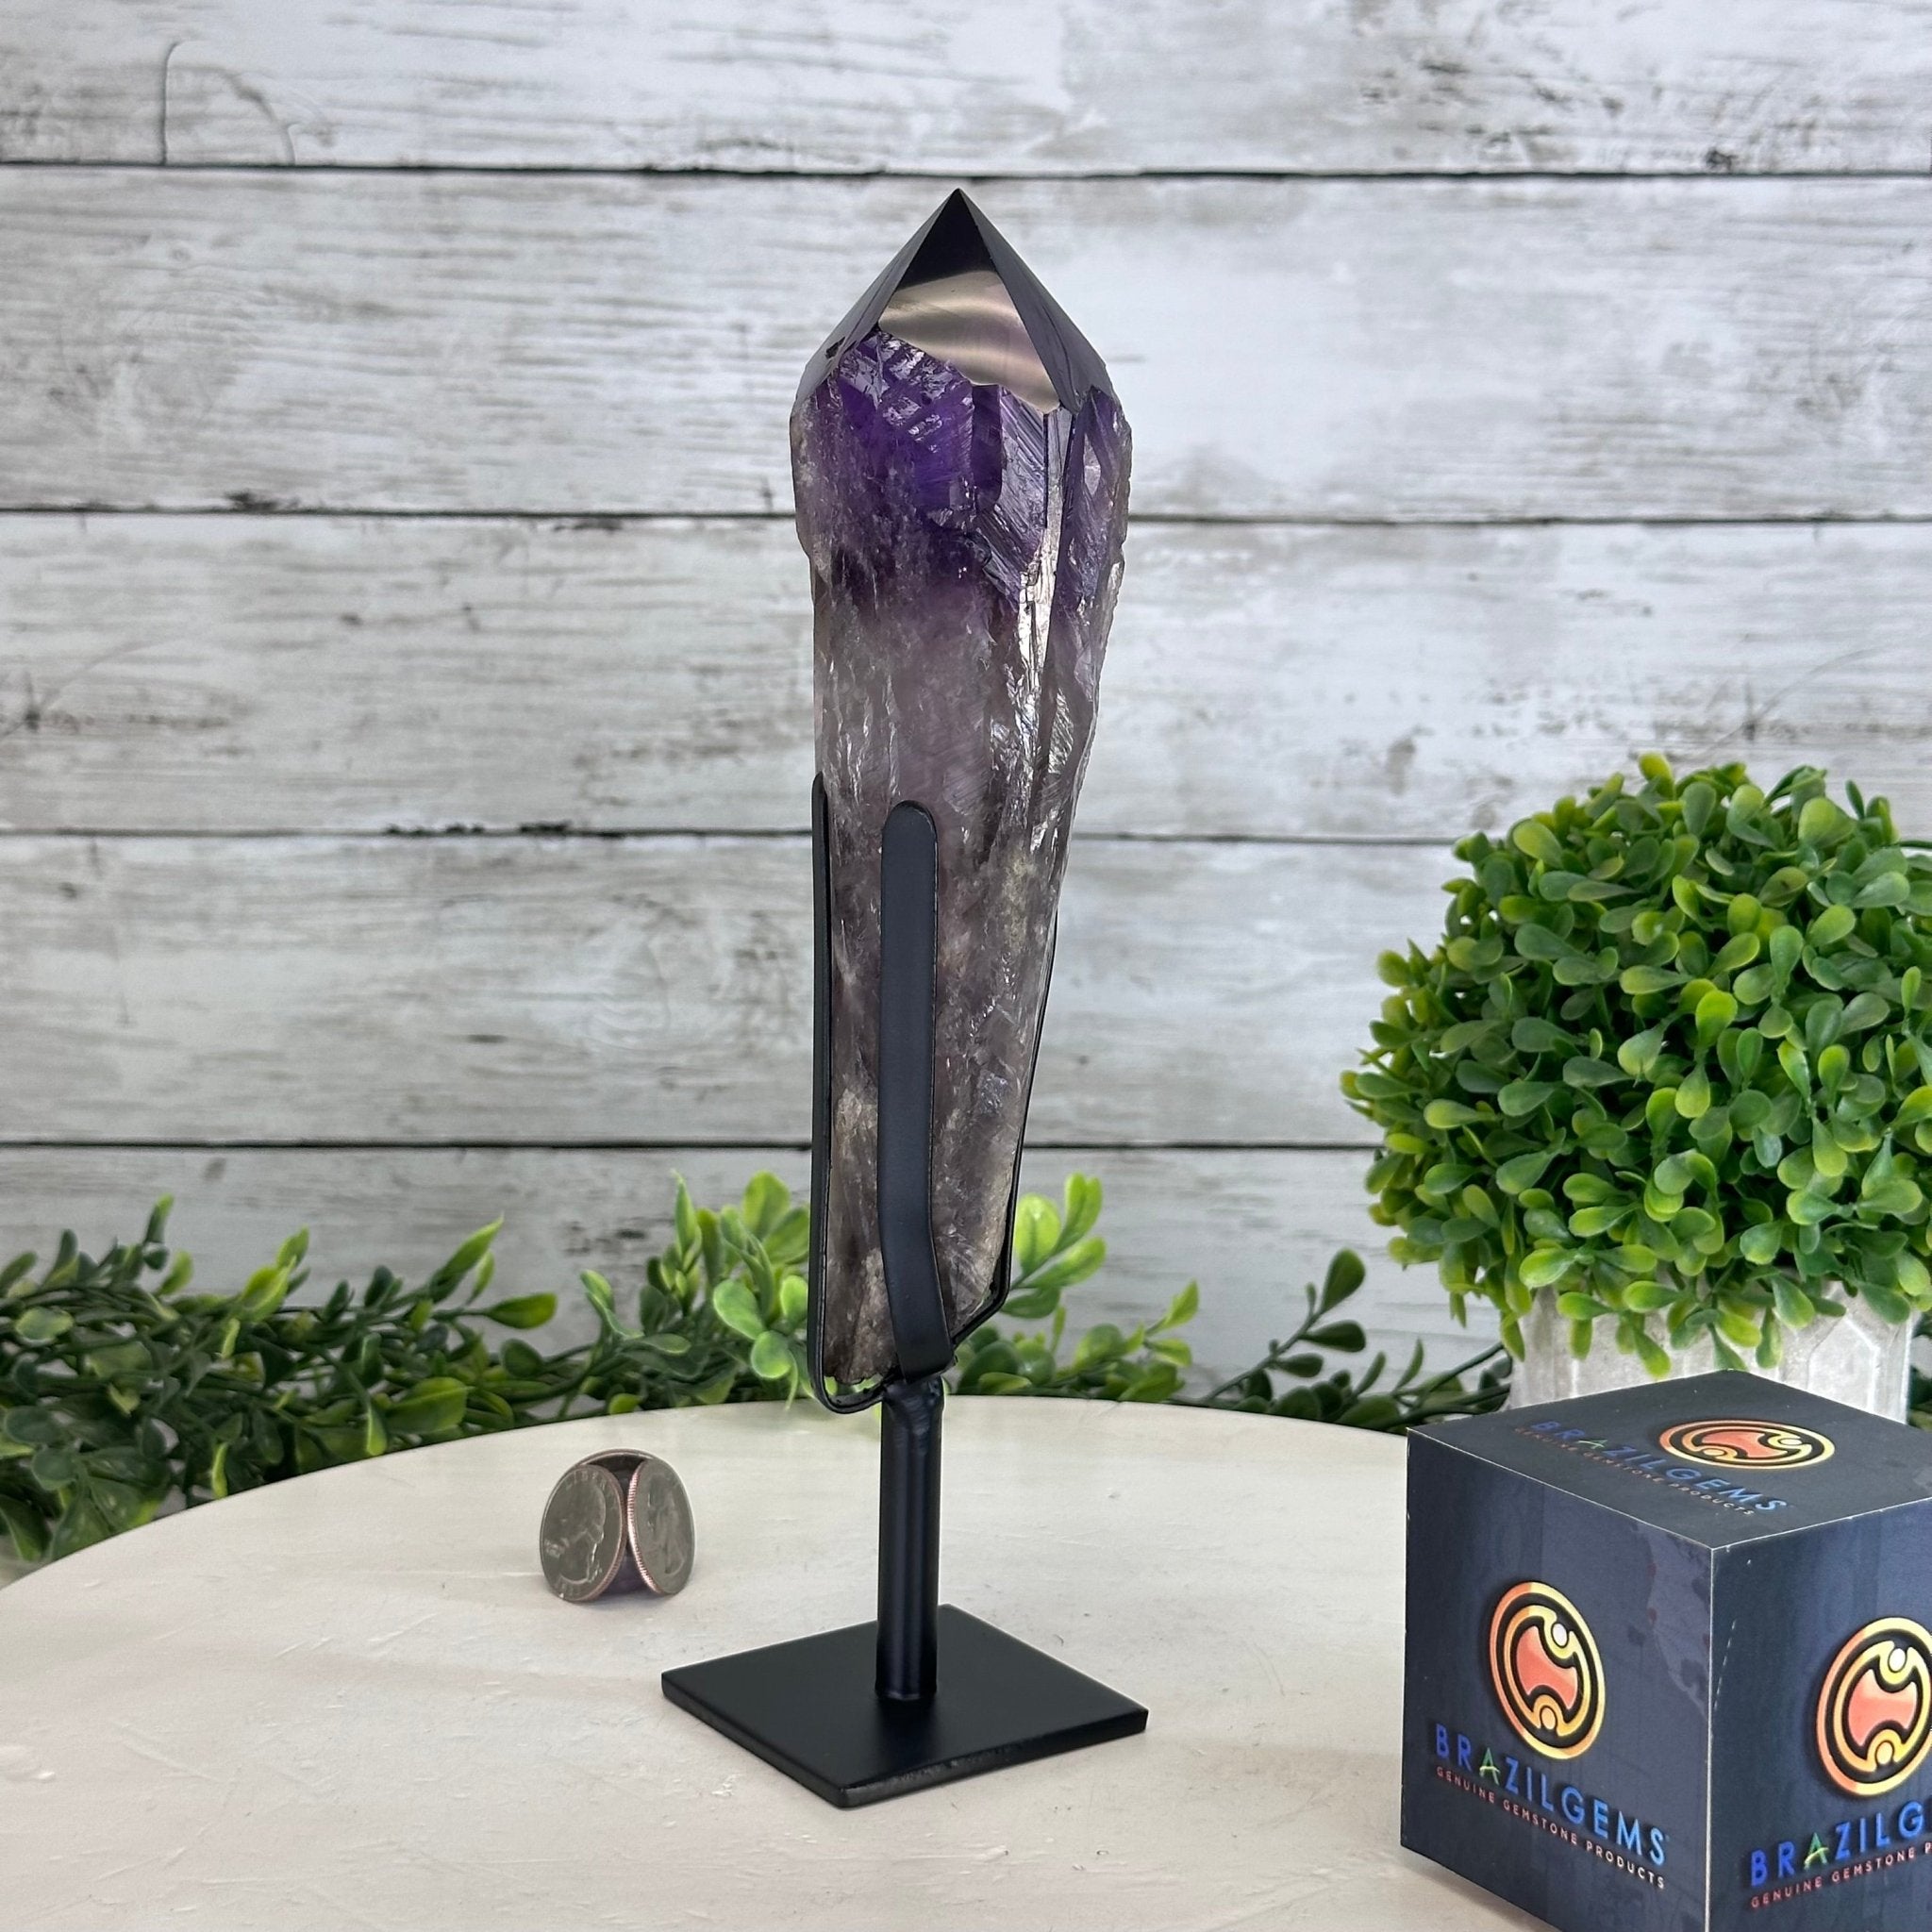 Super Quality Amethyst Wand on a Metal Stand, 1.5 lbs & 9.6" Tall #3123AM-001 - Brazil GemsBrazil GemsSuper Quality Amethyst Wand on a Metal Stand, 1.5 lbs & 9.6" Tall #3123AM-001Clusters on Fixed Bases3123AM-001